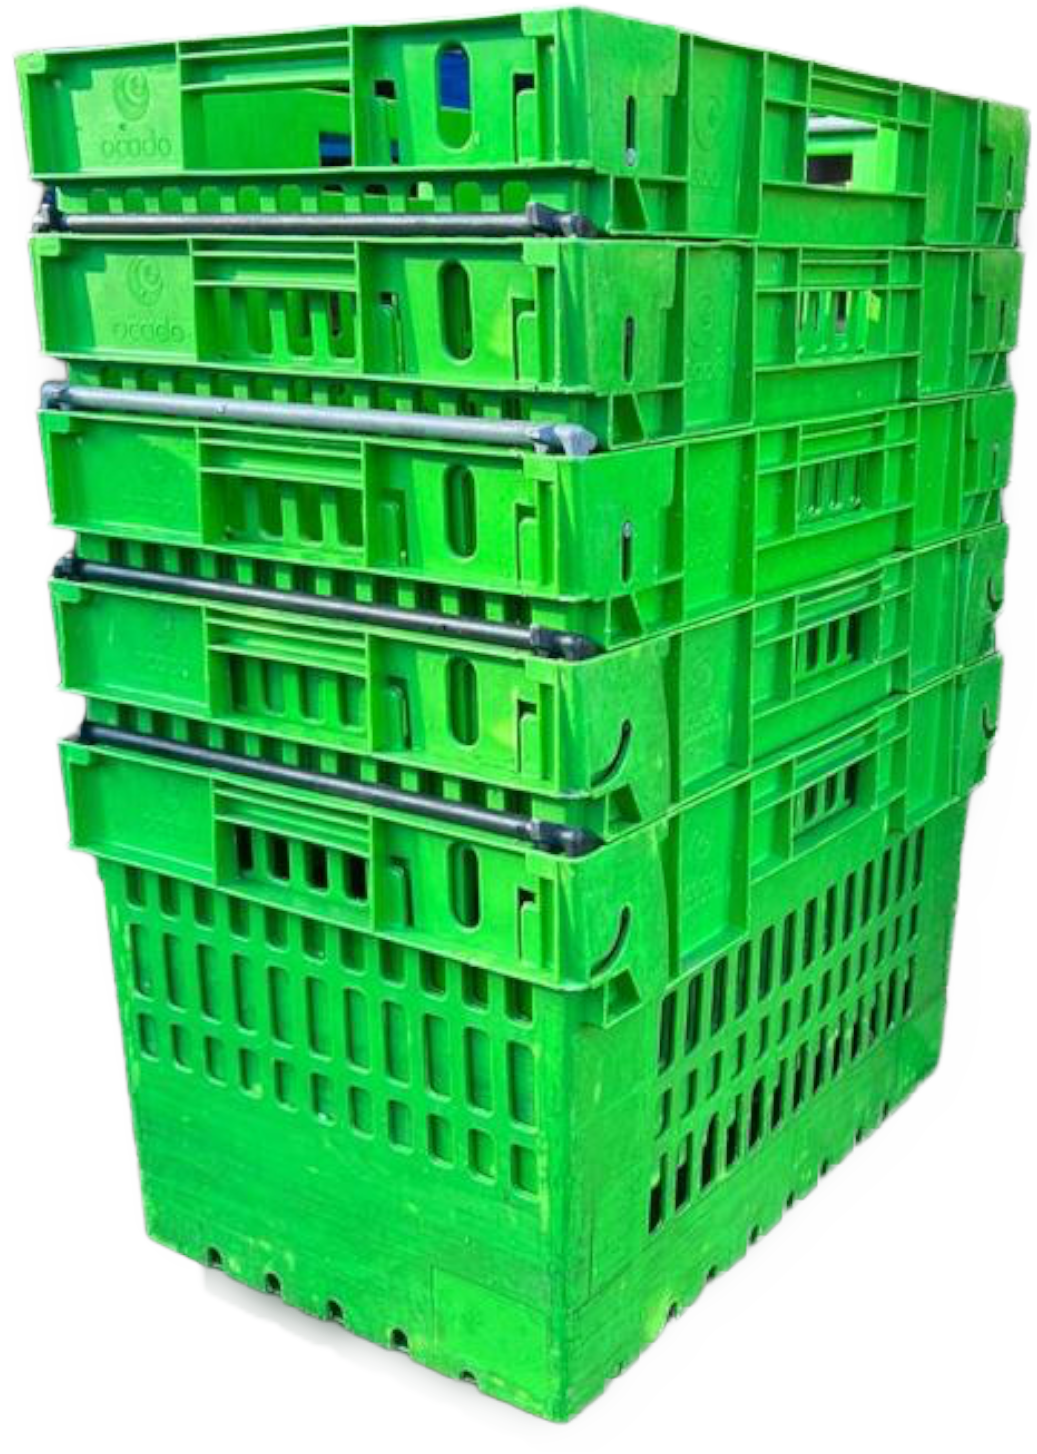 UK Suppliers Of 400x300x300 Black Eco Lidded Container (28 Ltr) For Transportation